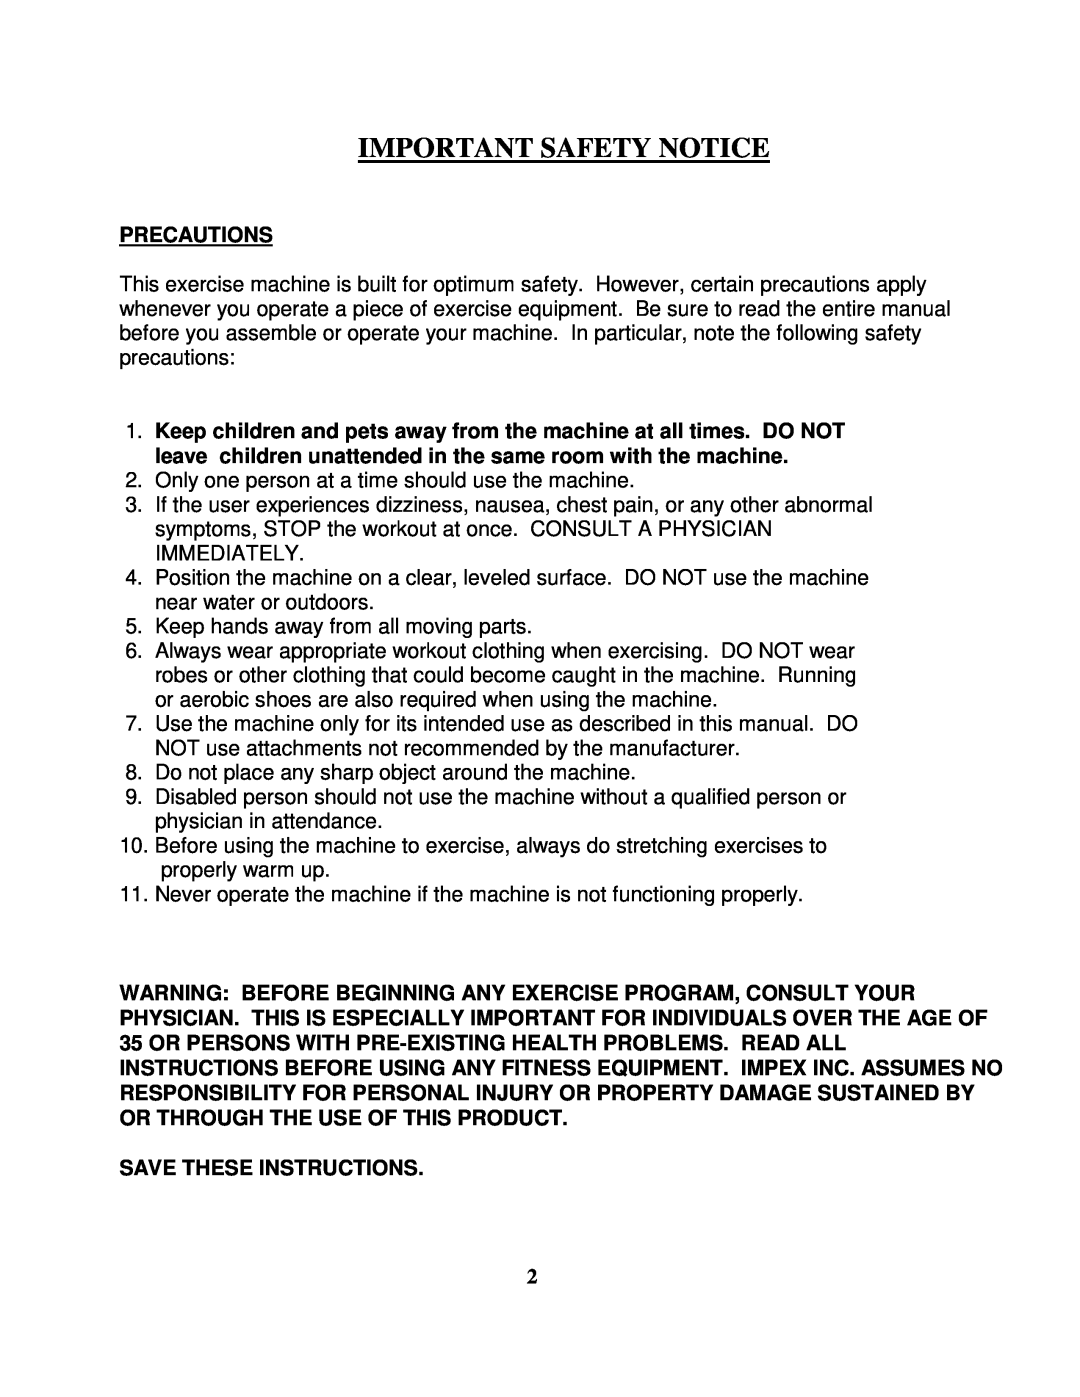 Impex WM 1407 manual Important Safety Notice, Precautions, Save These Instructions 